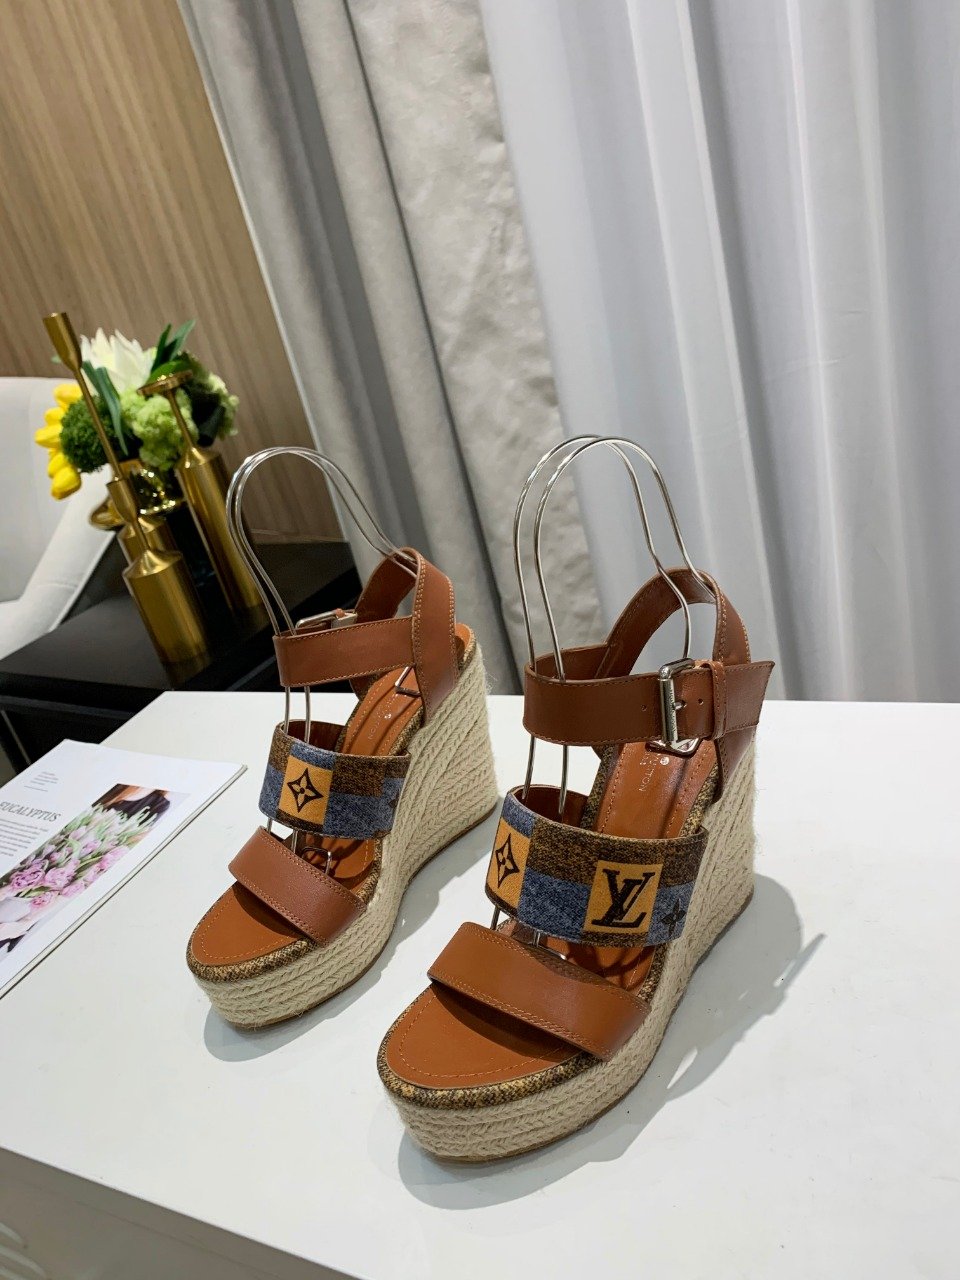 LV Louis Vuitton Women's Leather High-heeled Sandals Shoes